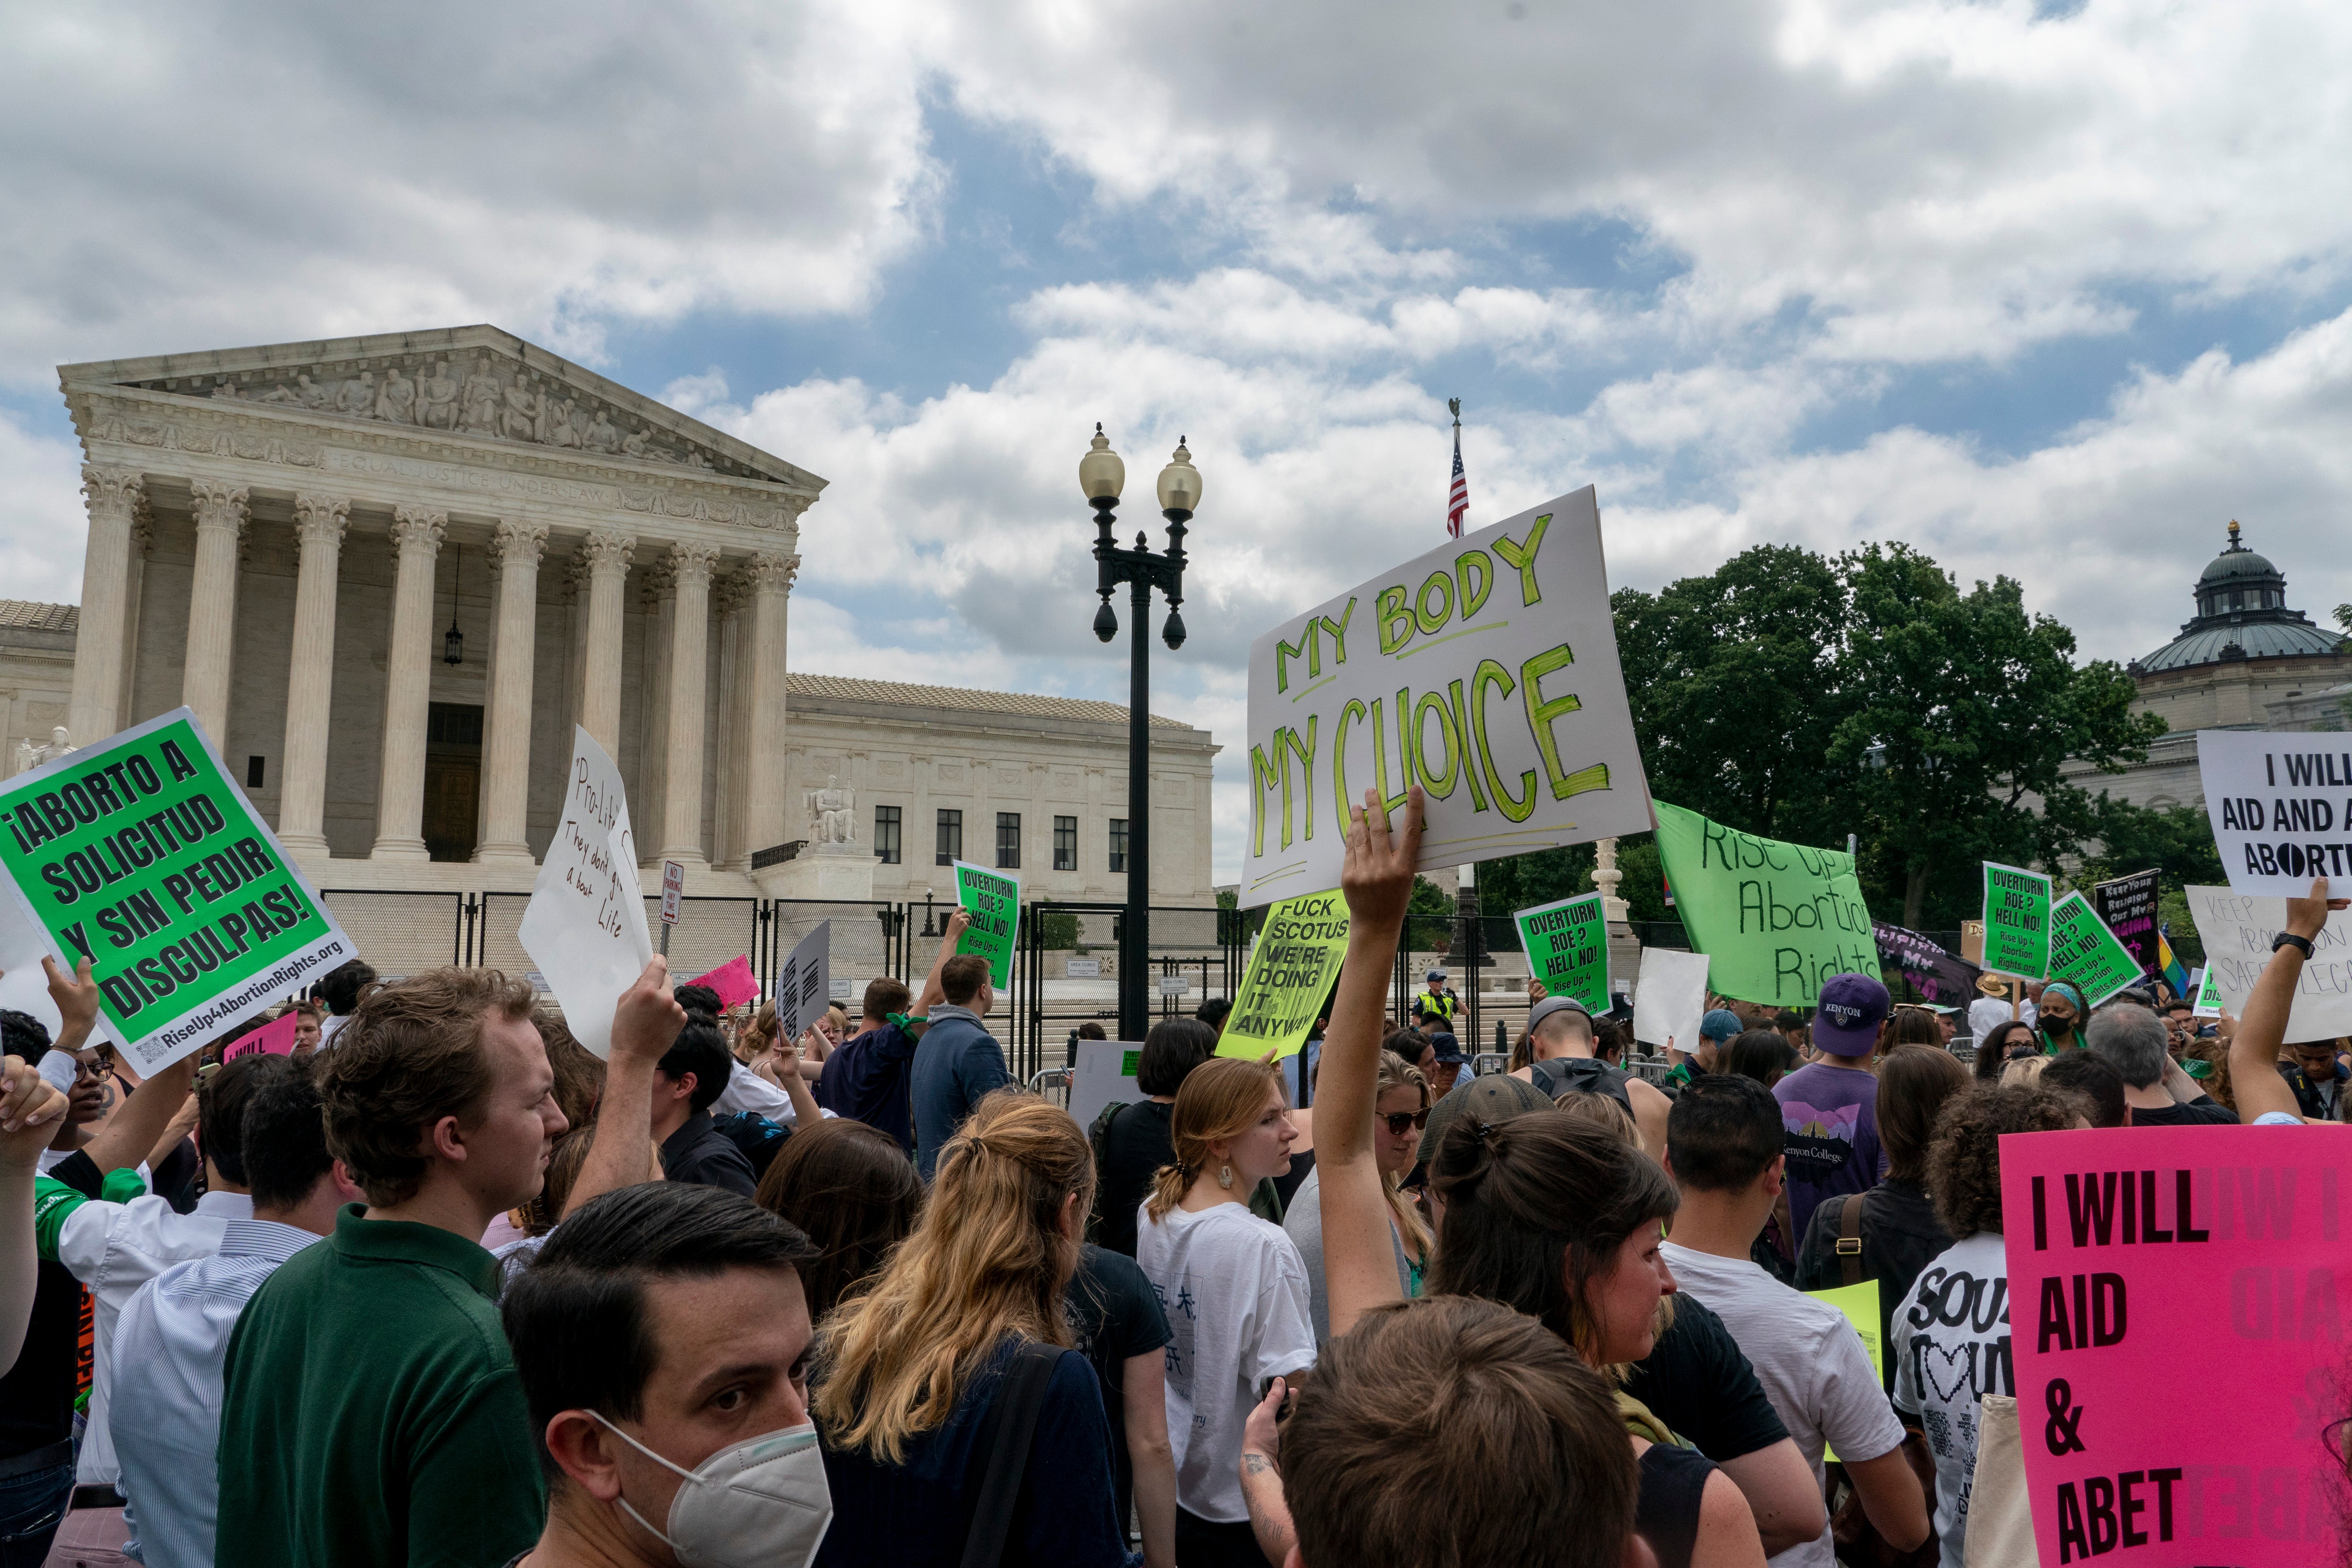 Pro-abortion demonstrators outside the Supreme Court on Friday